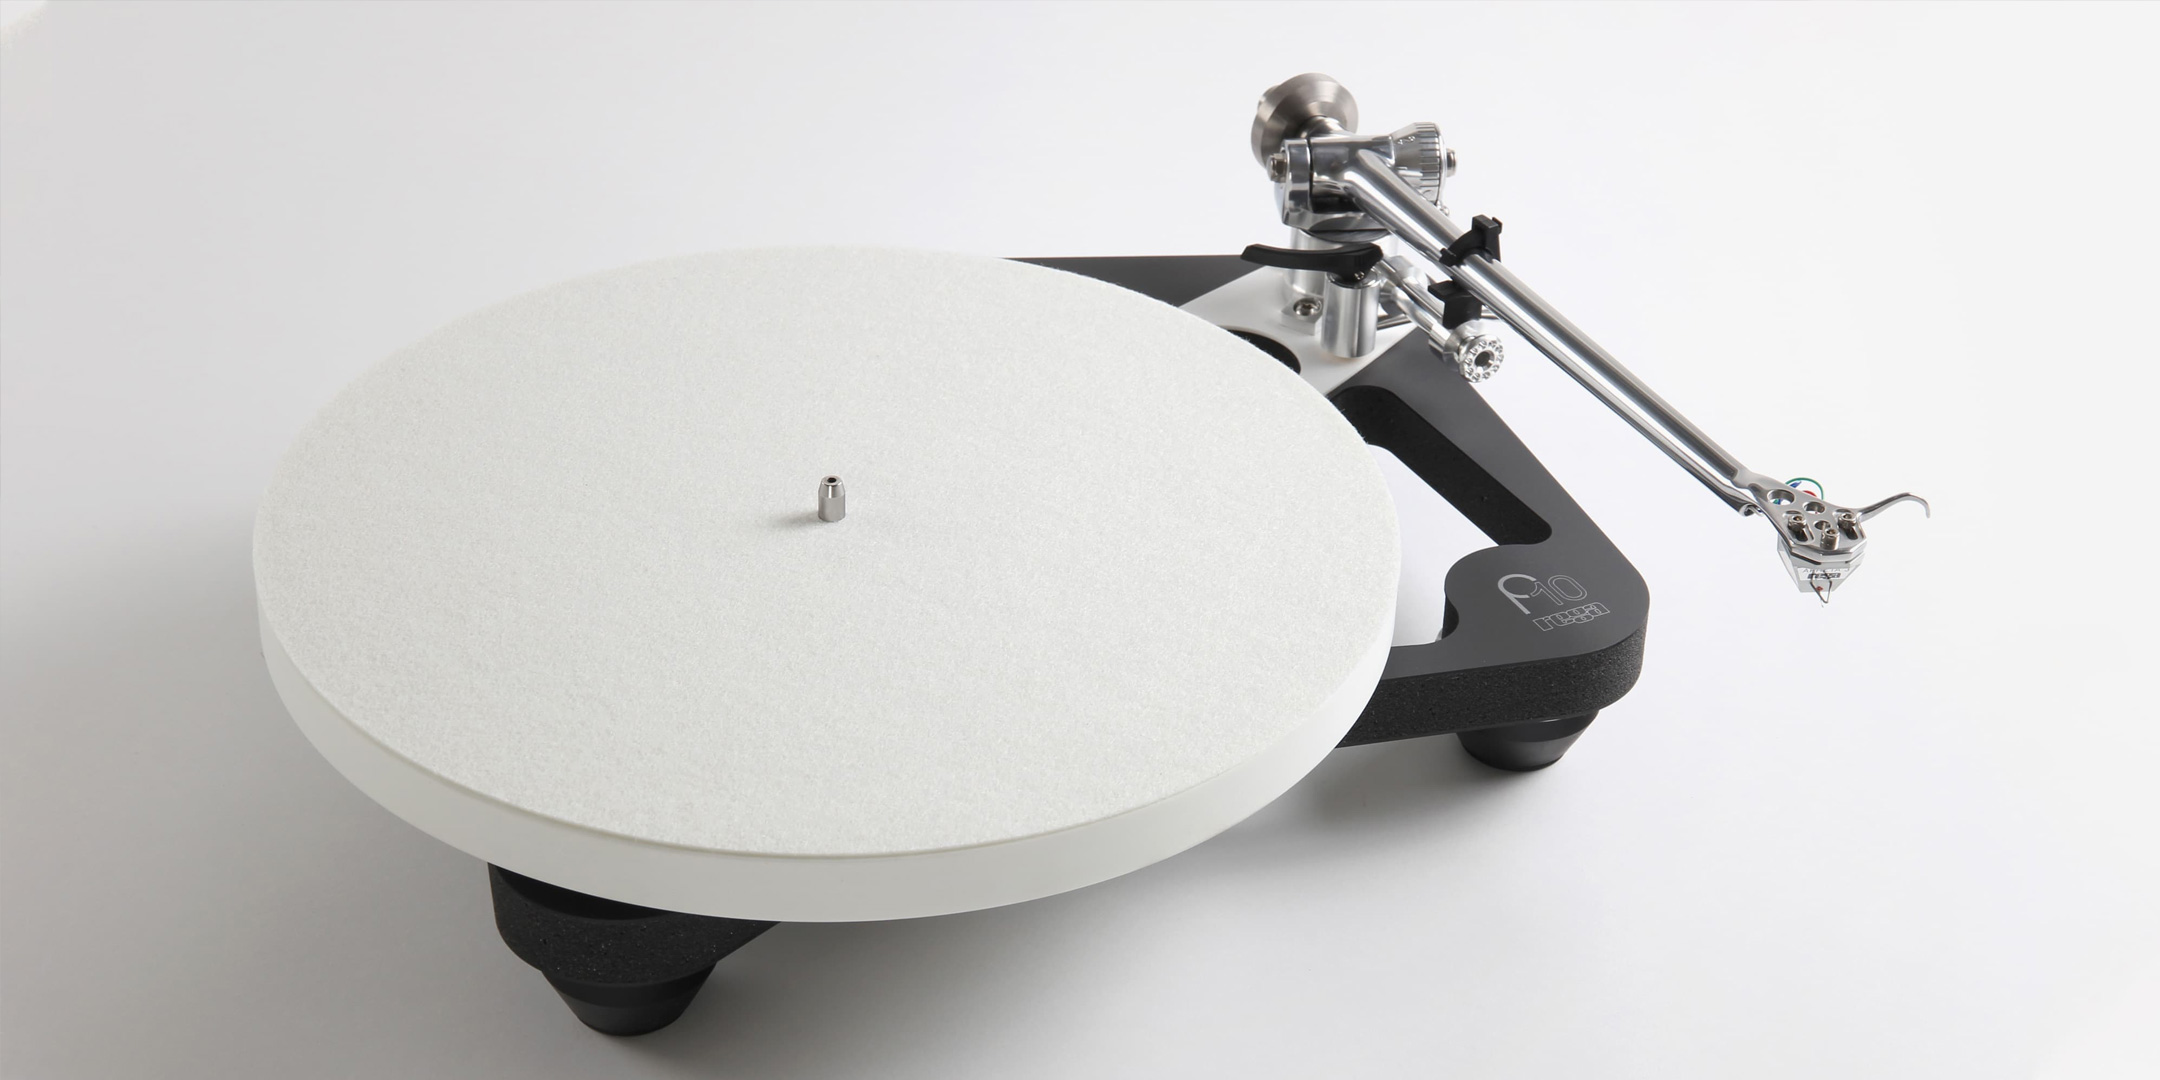 Pic of a Rega Planar 10 Turntable showing the platter